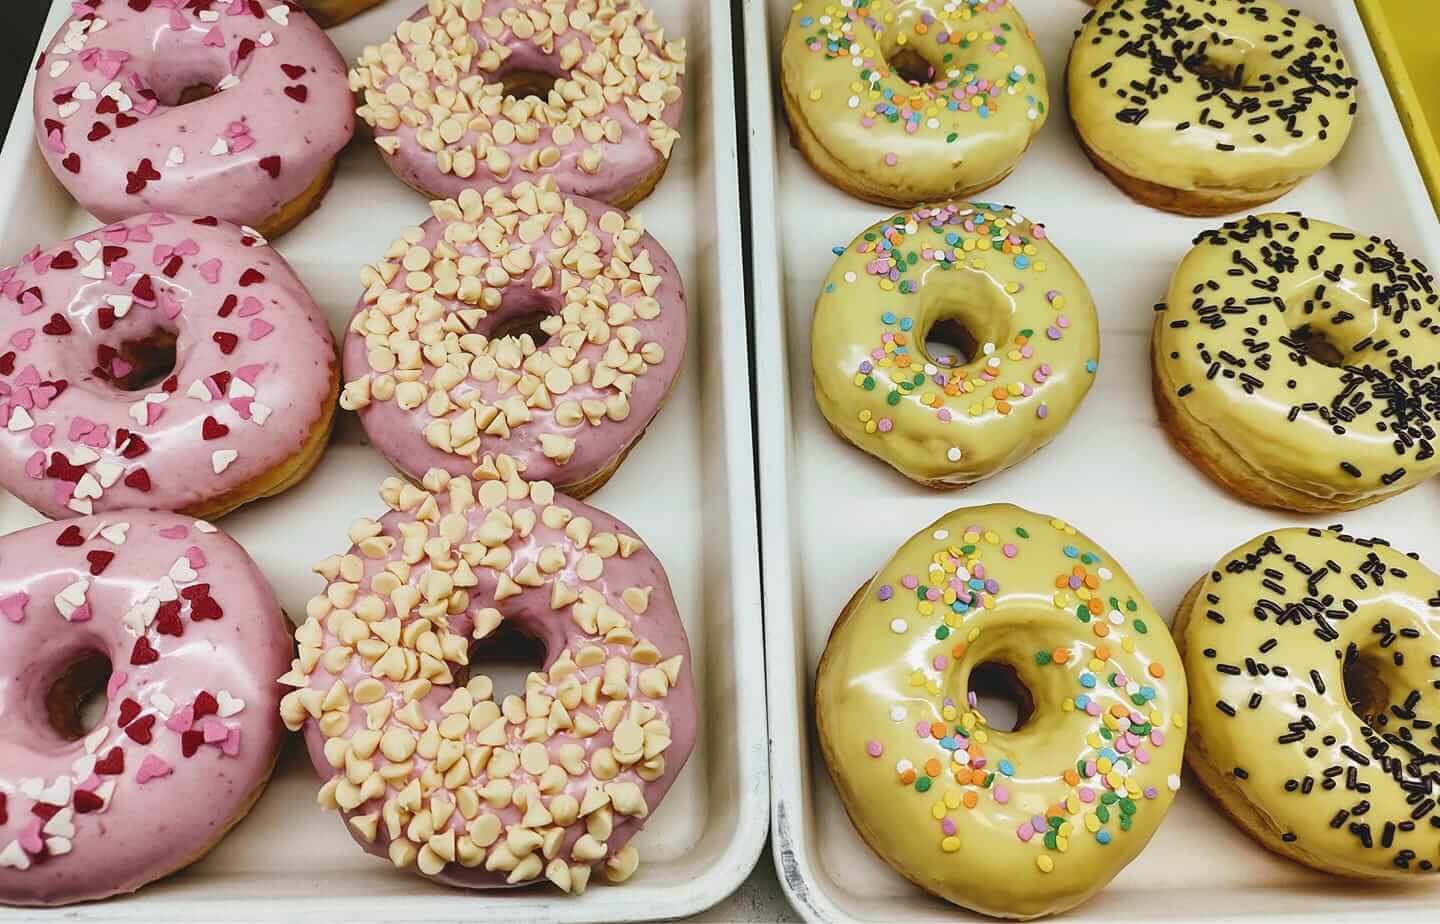 Donuts from Fresh Start Donuts in Beverly Hills Florida.